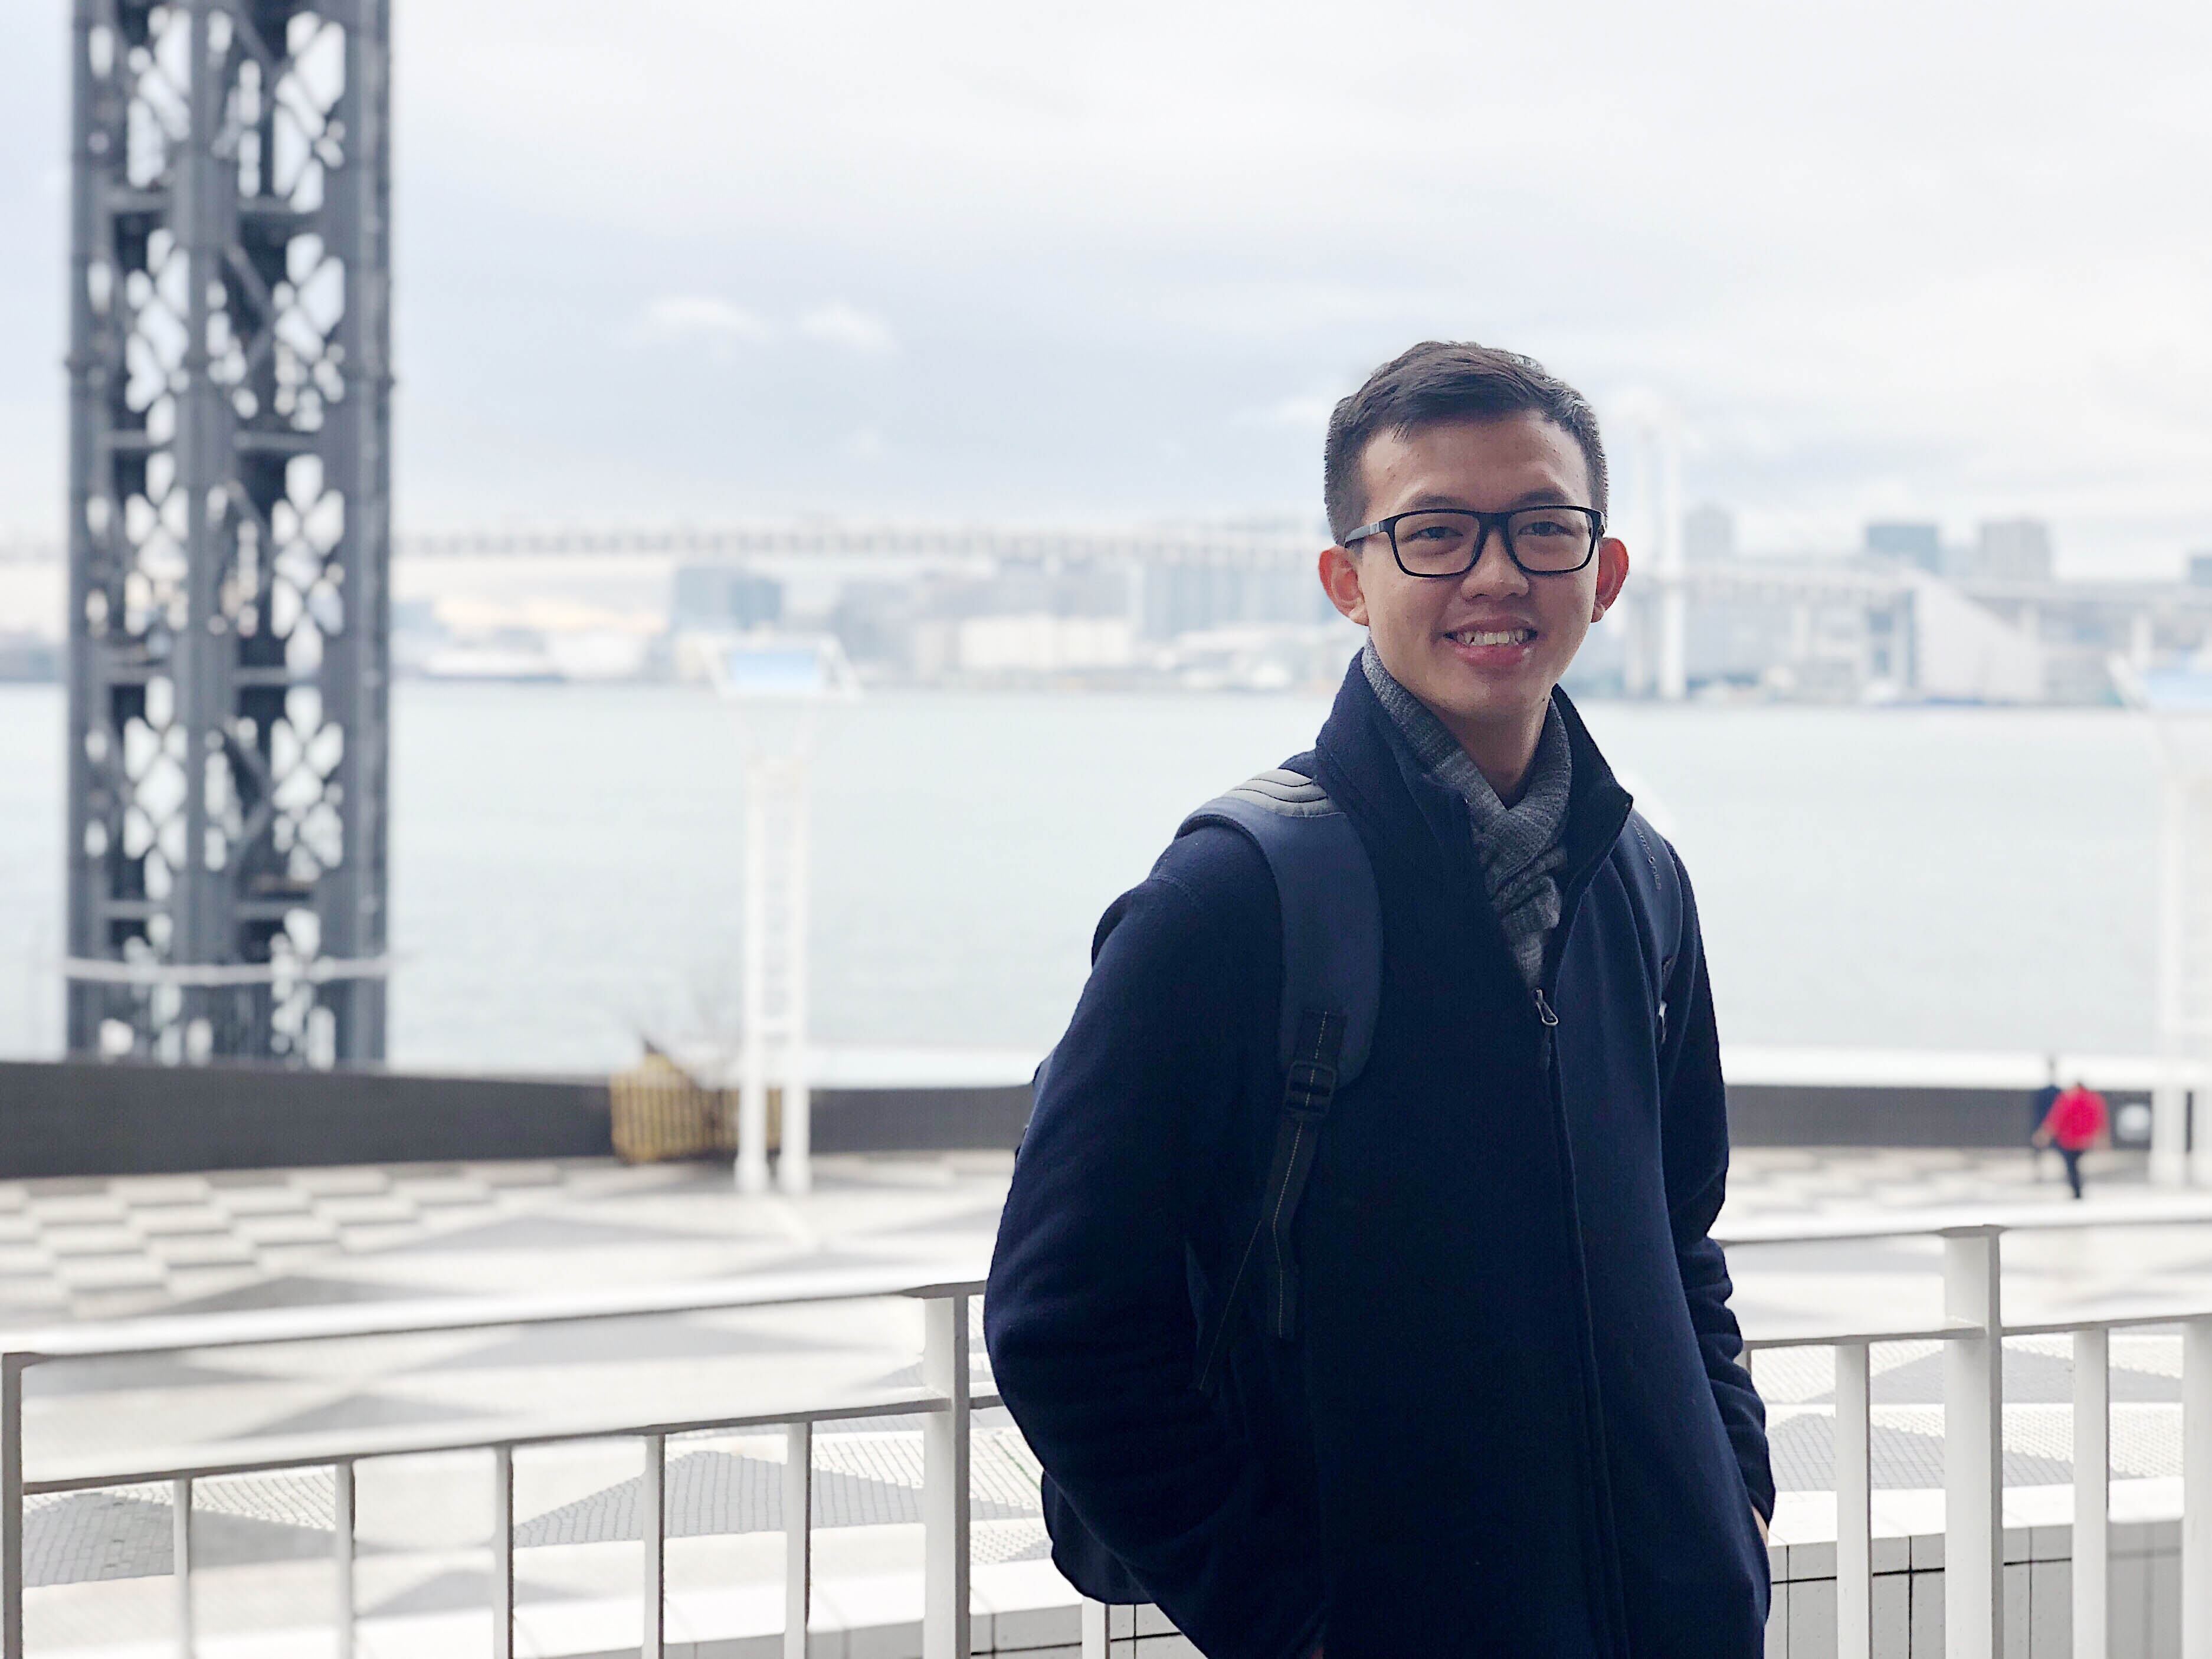 The 2017 RMIT President’s Award recipient Mai Duc Hieu, made the most out of his time on the SSEAYP voyage.